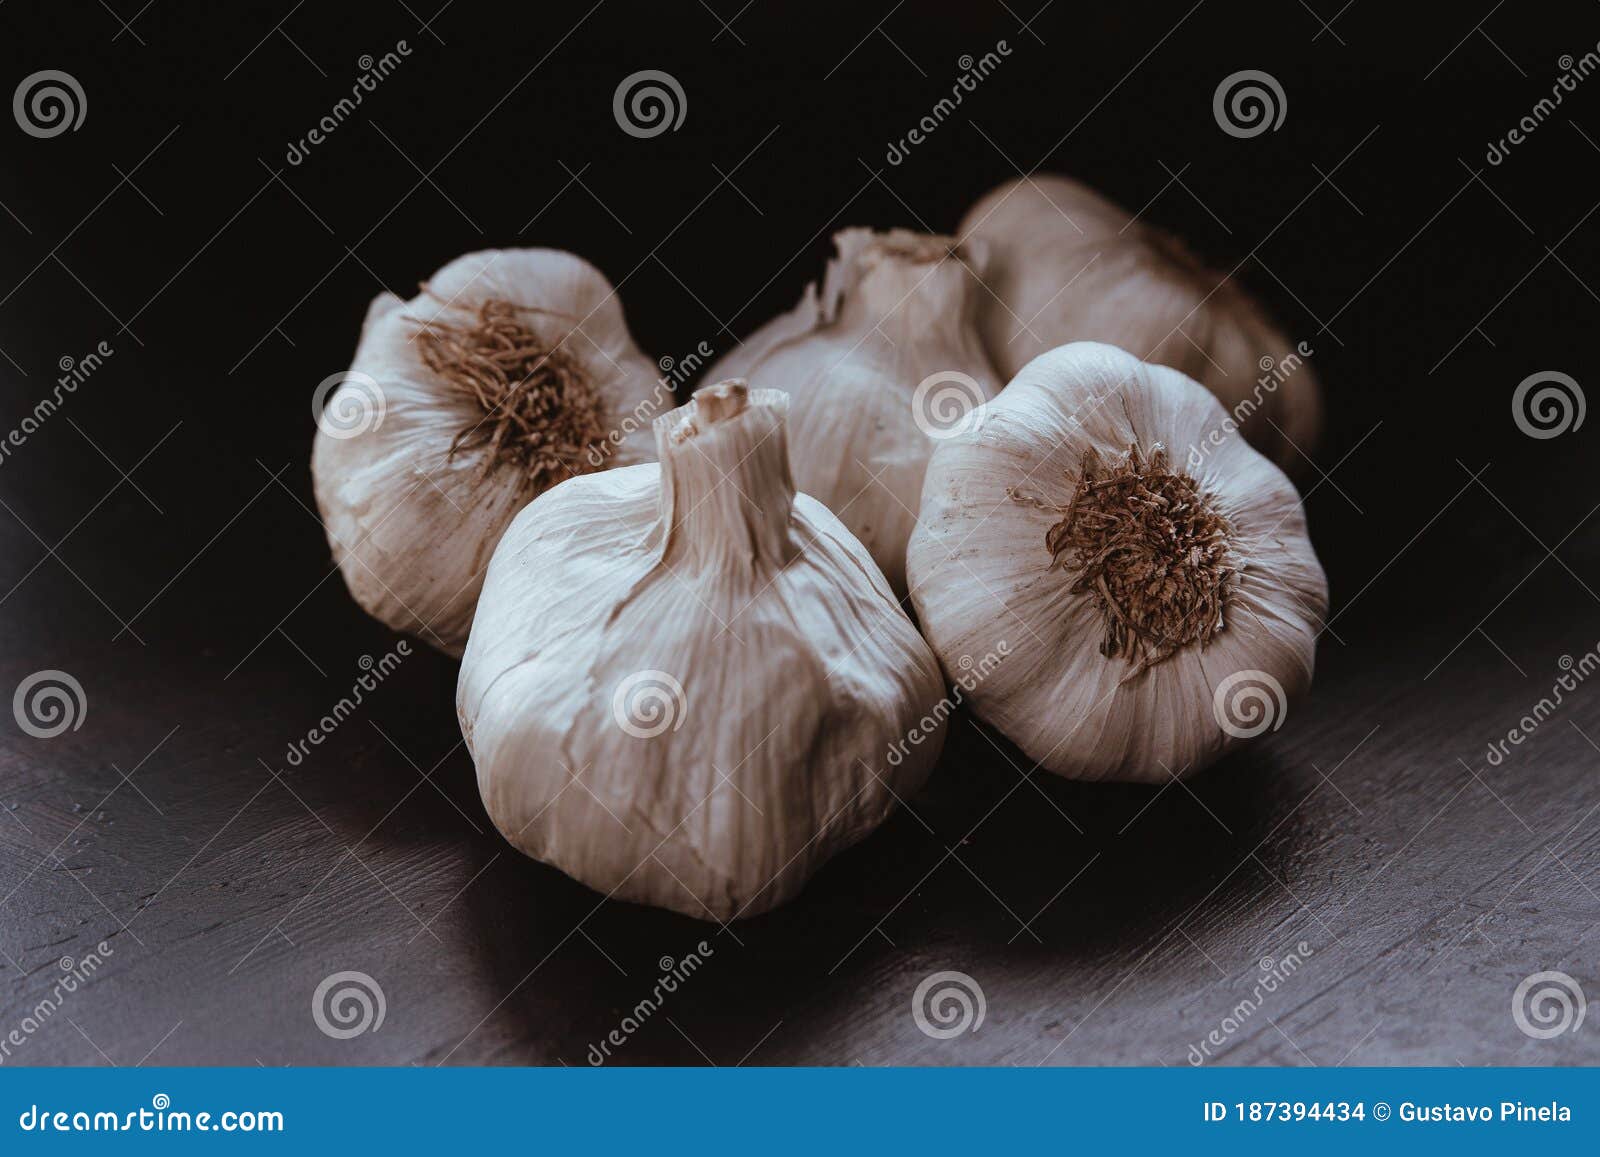 group of large white garlic, hand-picked